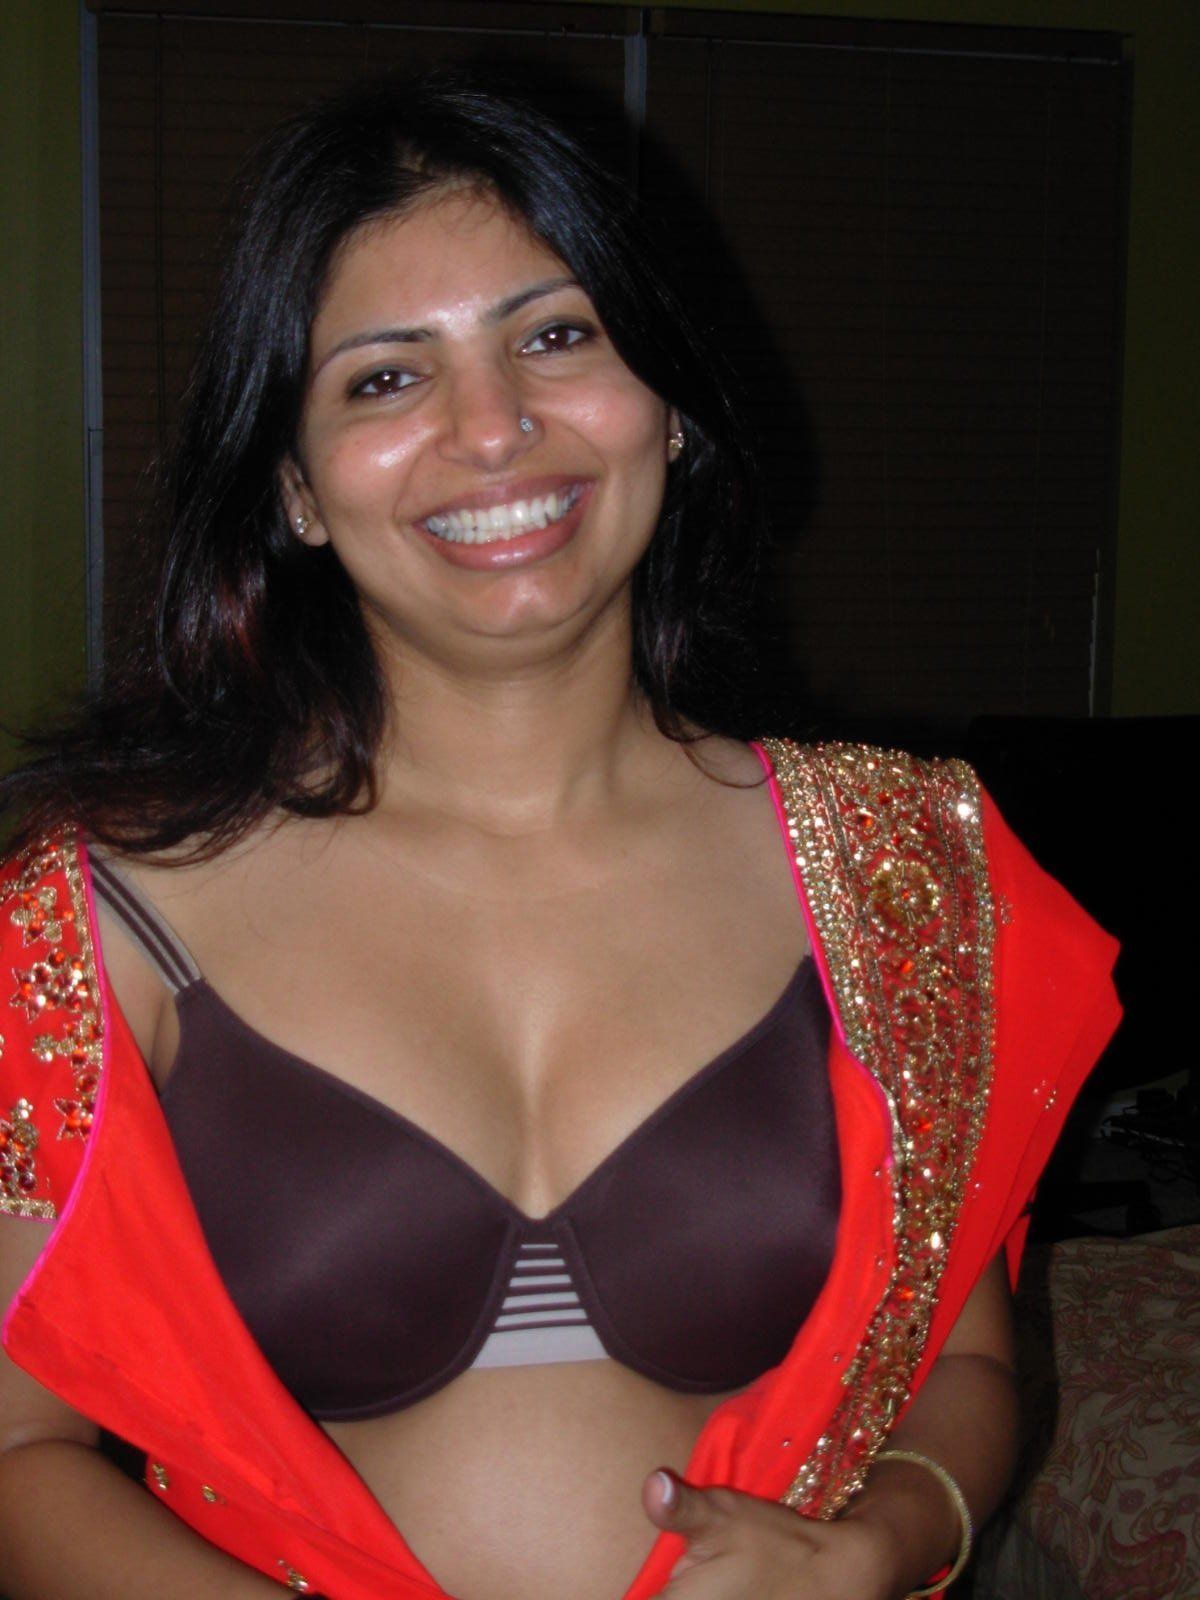 Nude photos of rich indian women